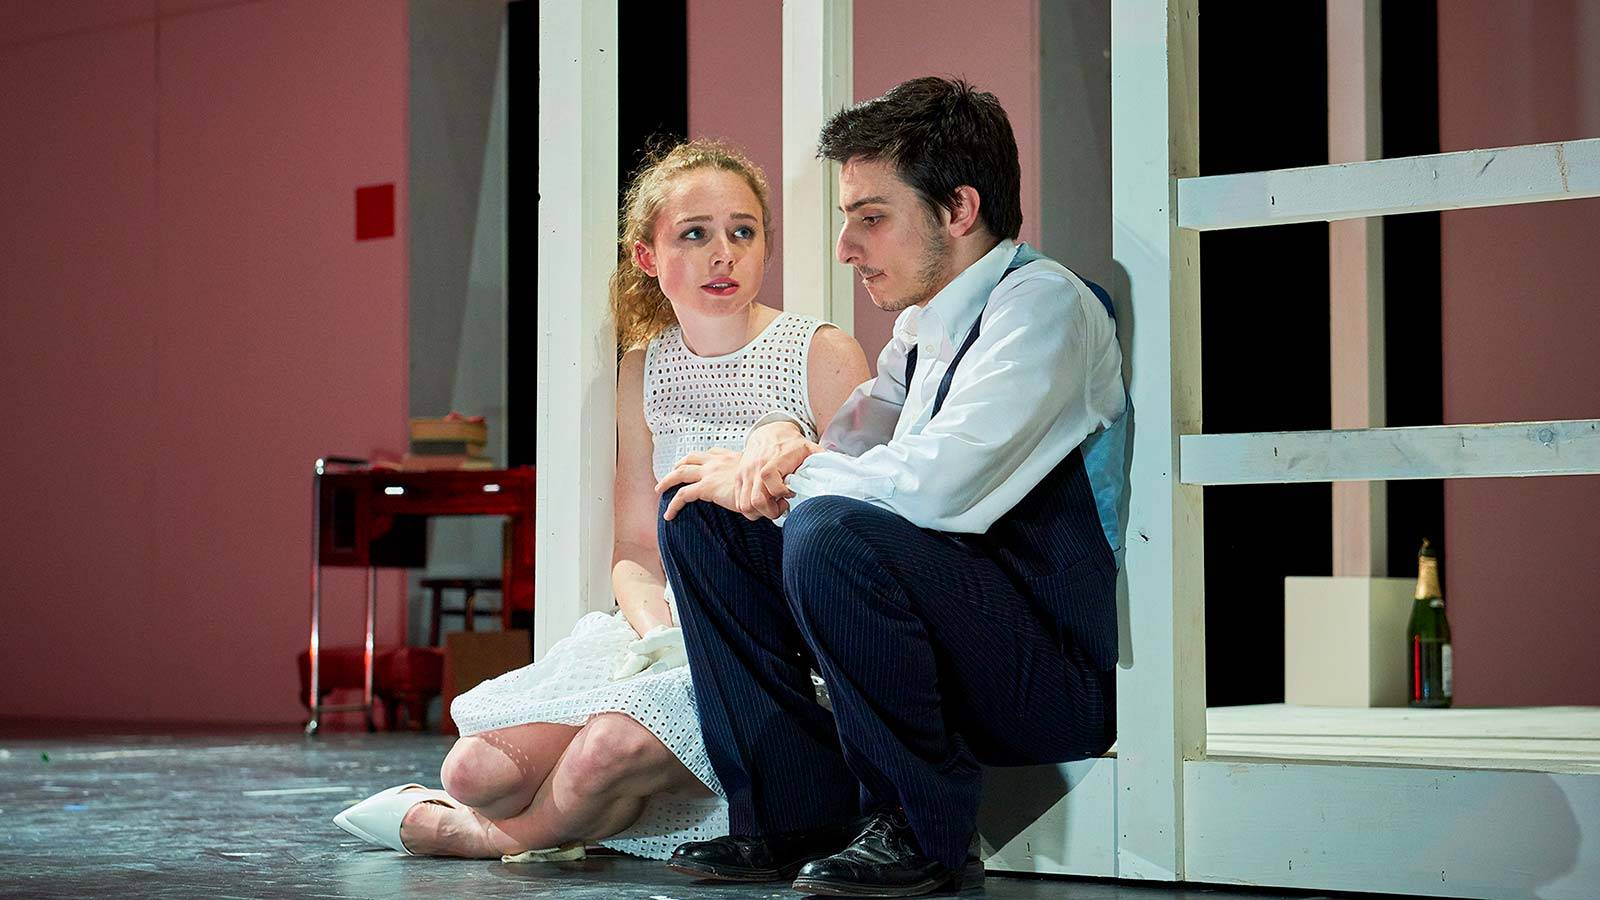 A male and female actor sit on stage engaged in an intense conversation